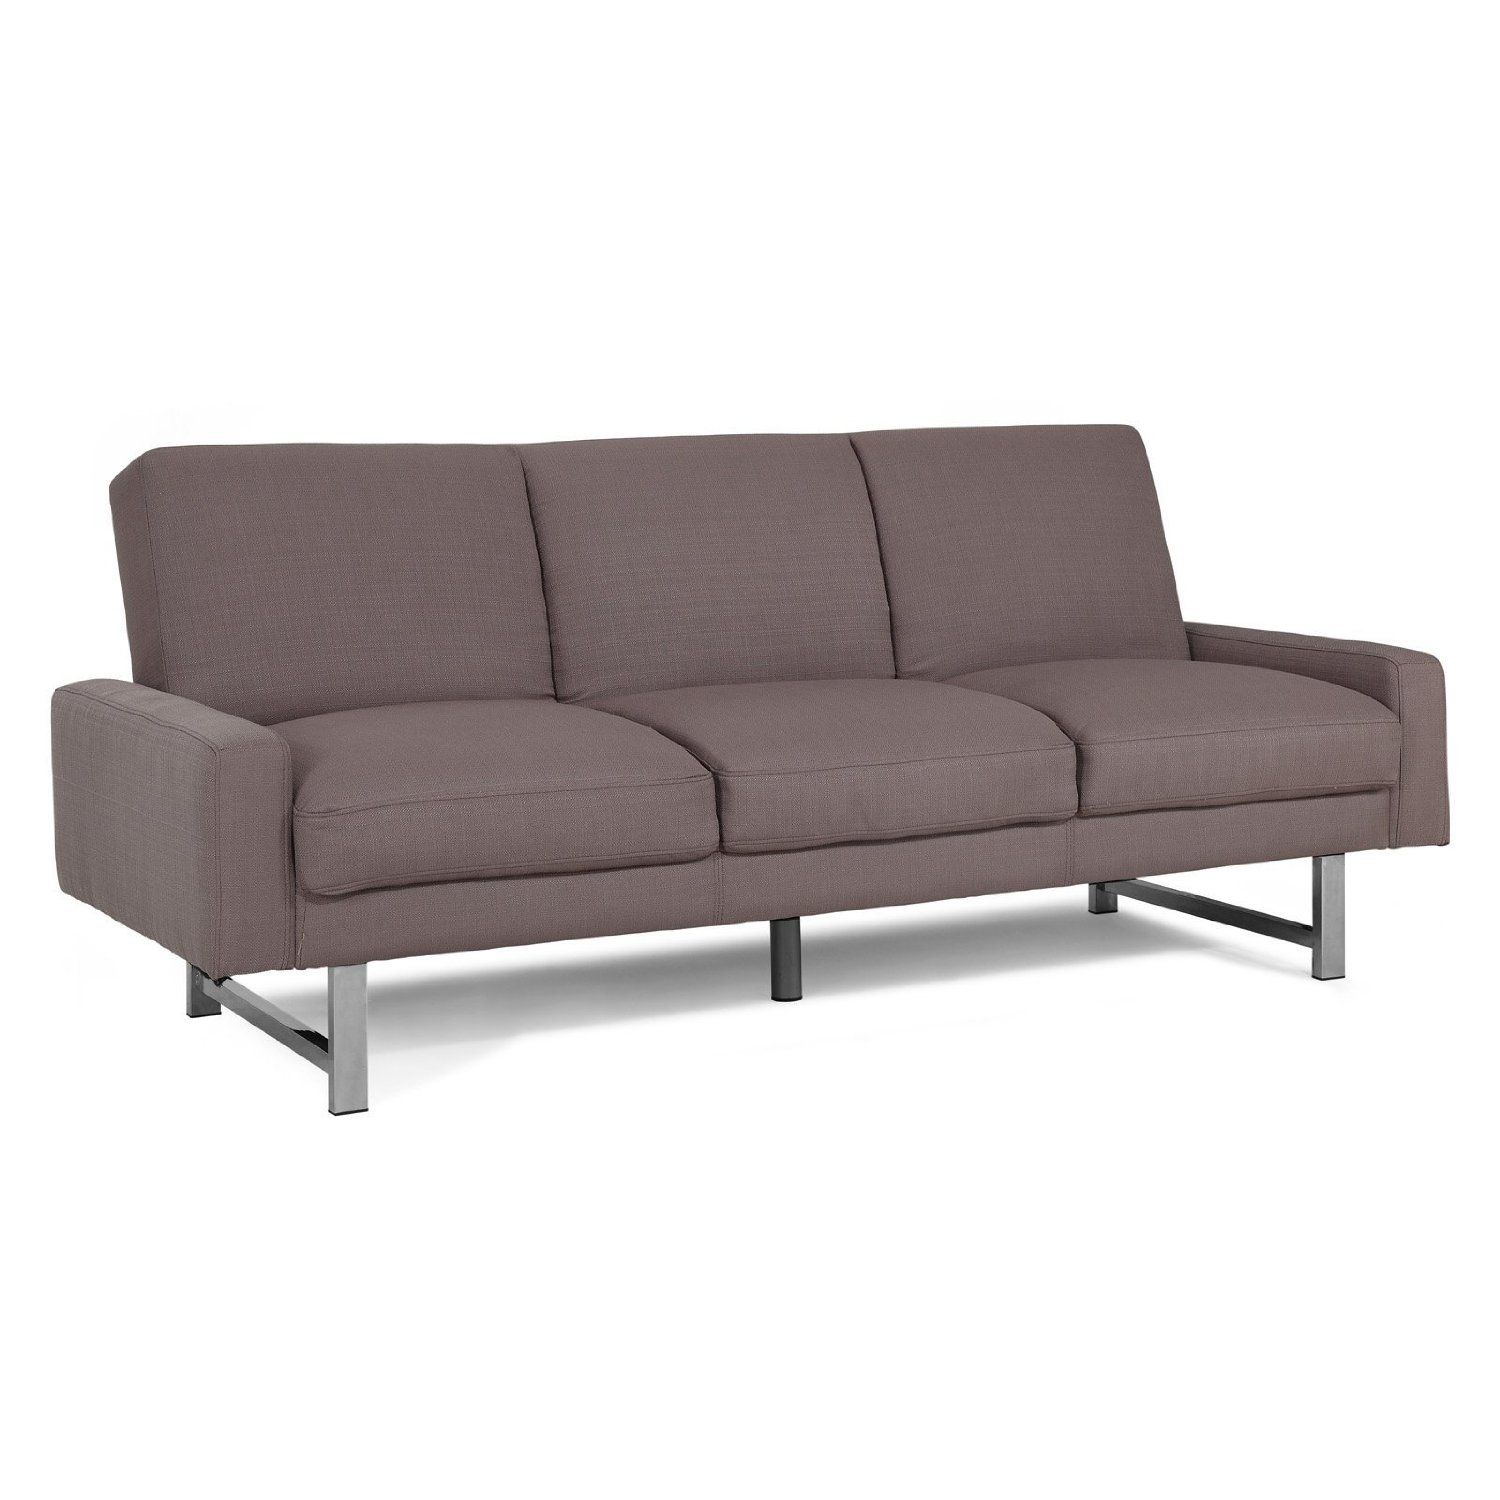 Convertible Sofa: Convertible Sectional Sofa In 8 Seat Convertible Sofas (View 18 of 20)